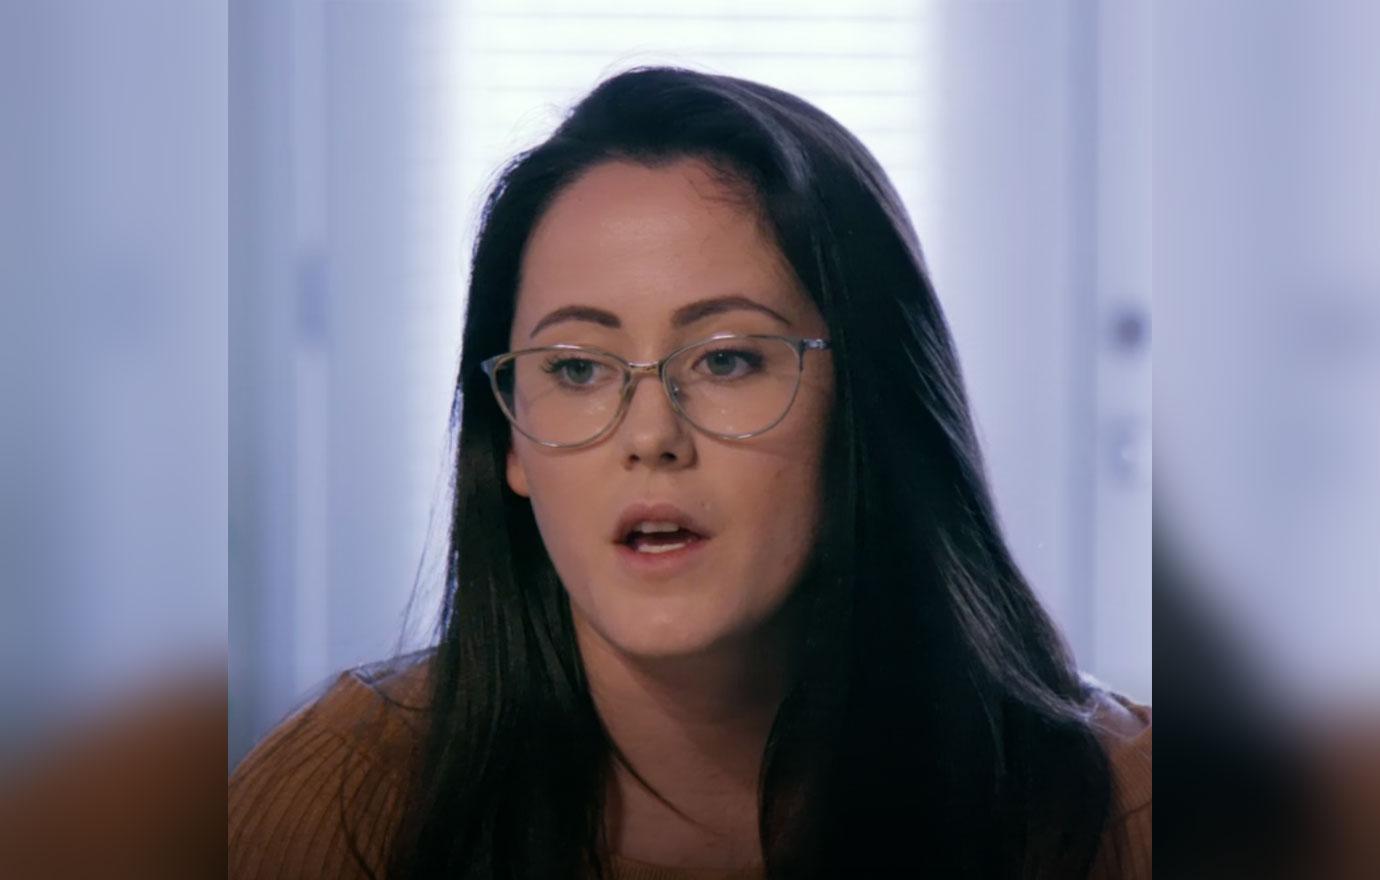 Jenelle Begged MTV To Let Her Film 'TM2' With Briana